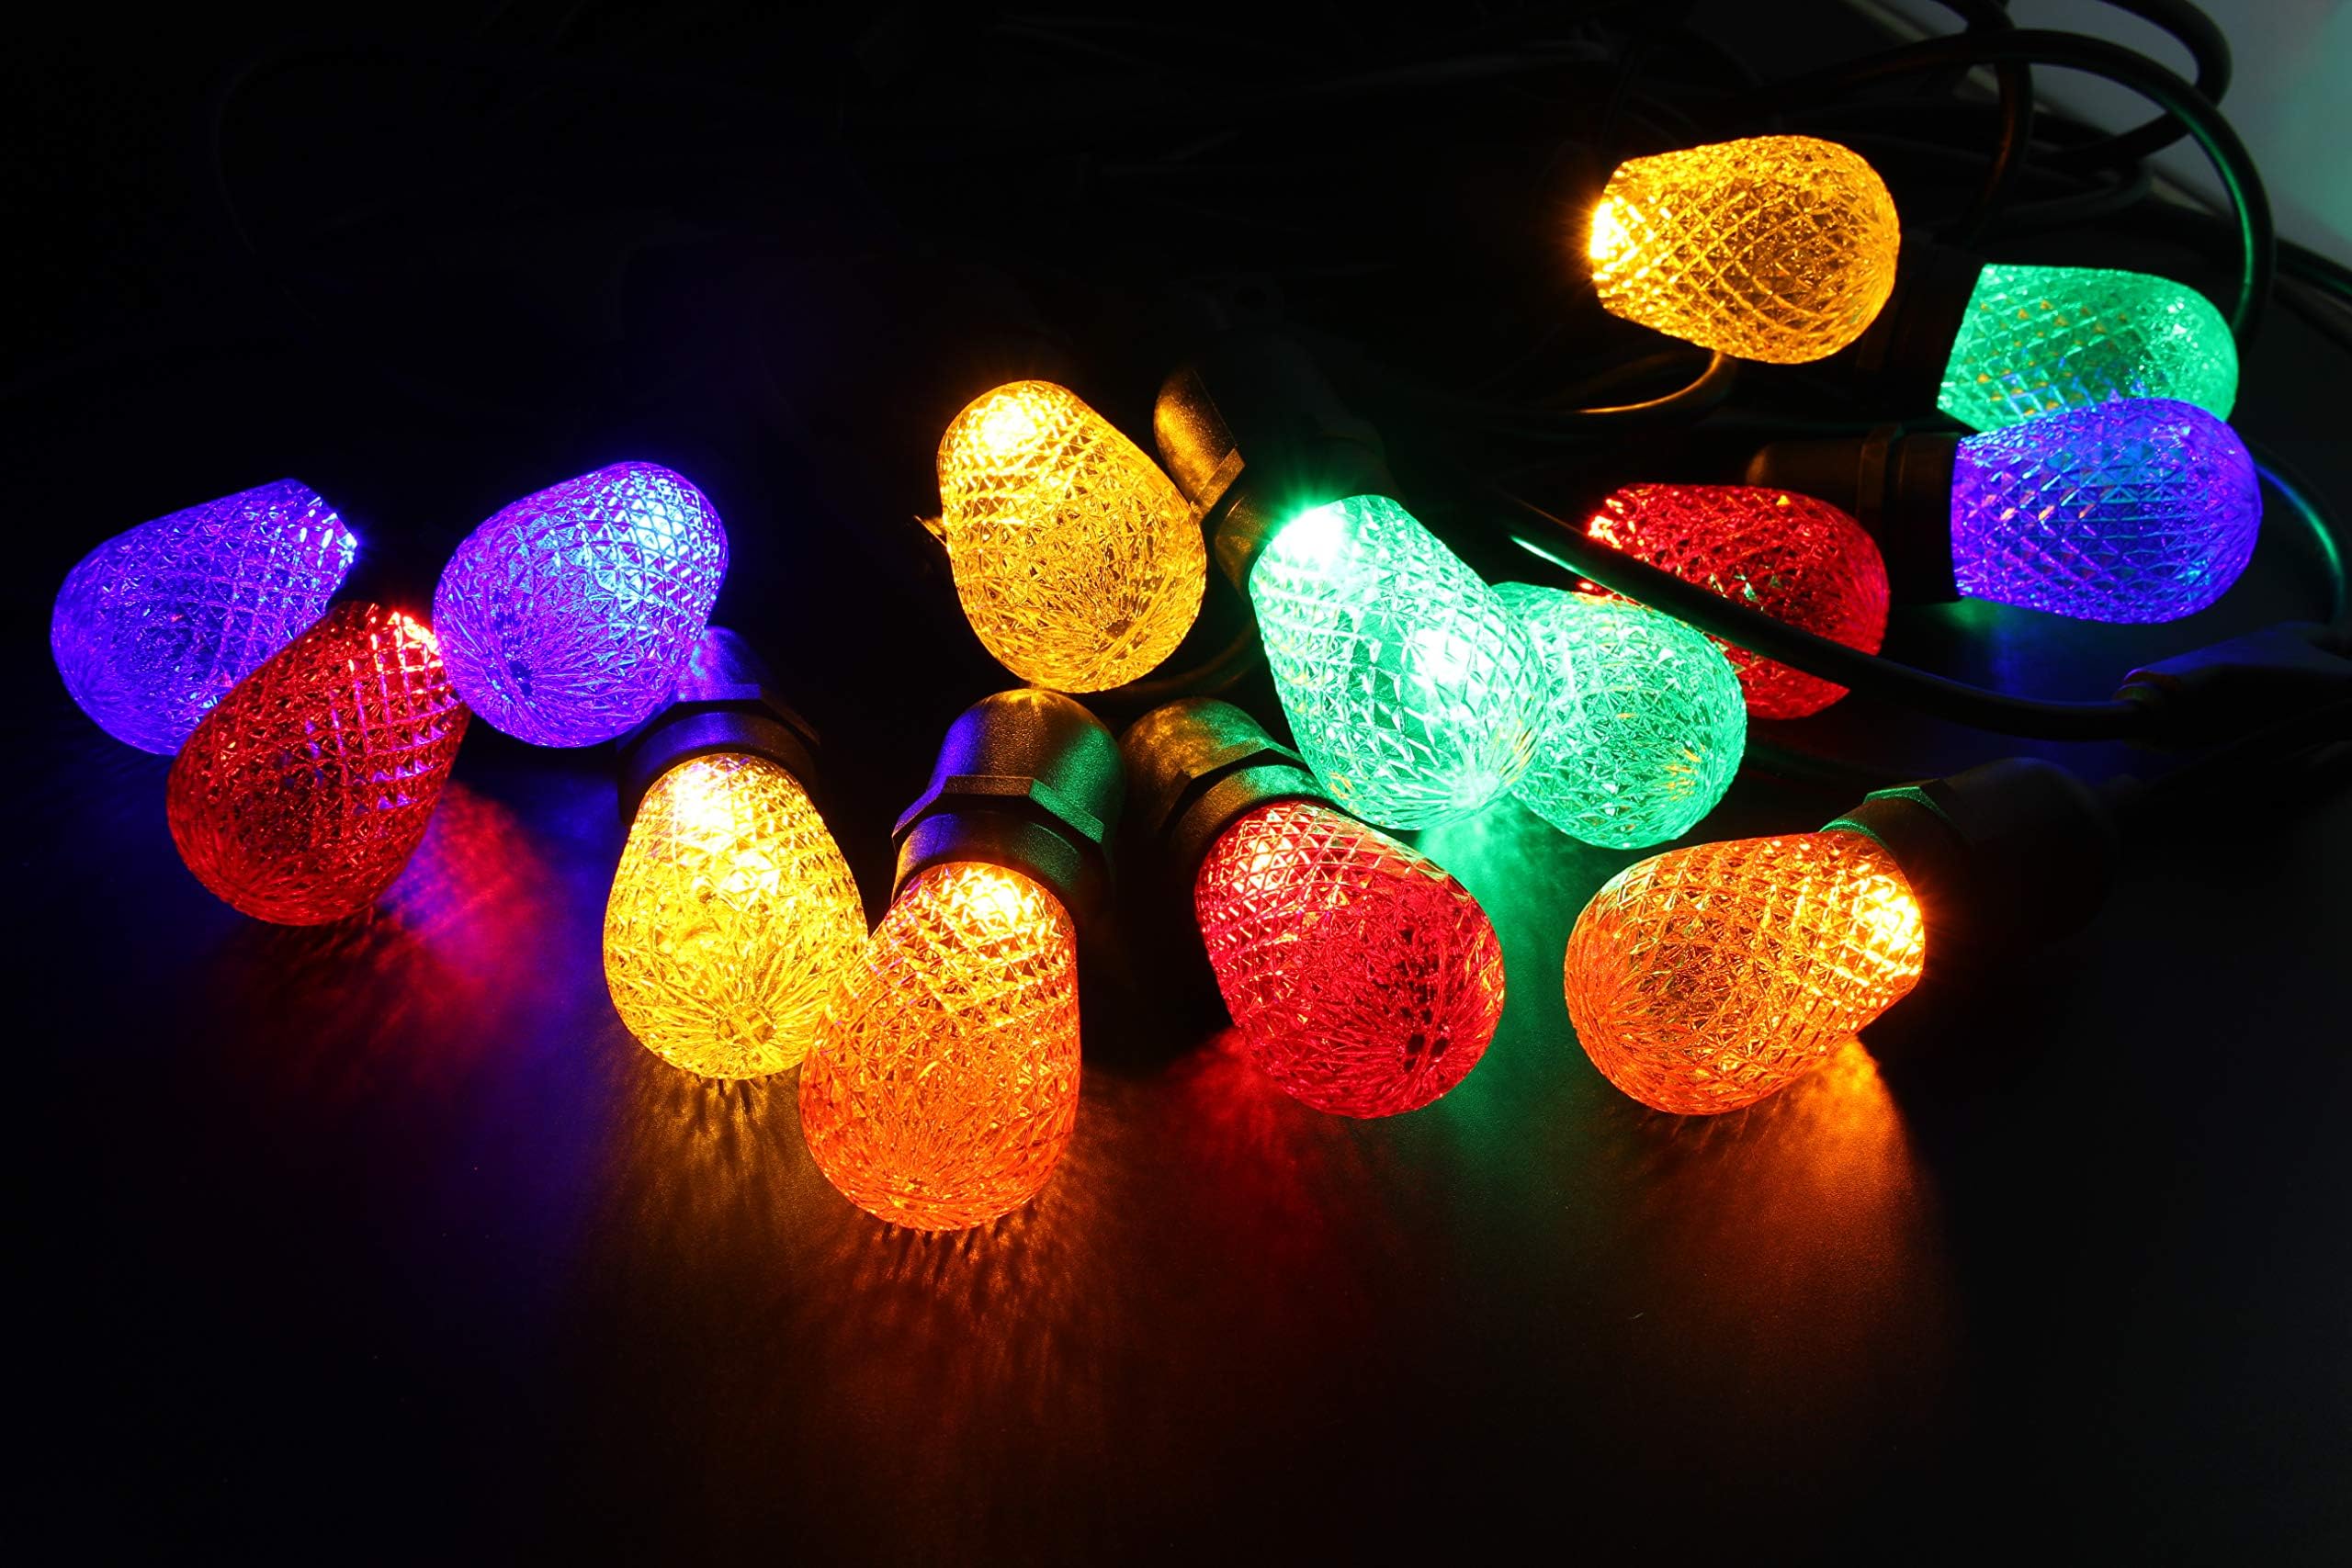 BRIMAX S14 Colored LED Bulbs Plastic for Christmas Outdoor String Lights Replacement, Shatterproof, E26 Base Multi Color Red/Orange/Blue/Green/Yellow, Halloween Decorative Bulb 15pack